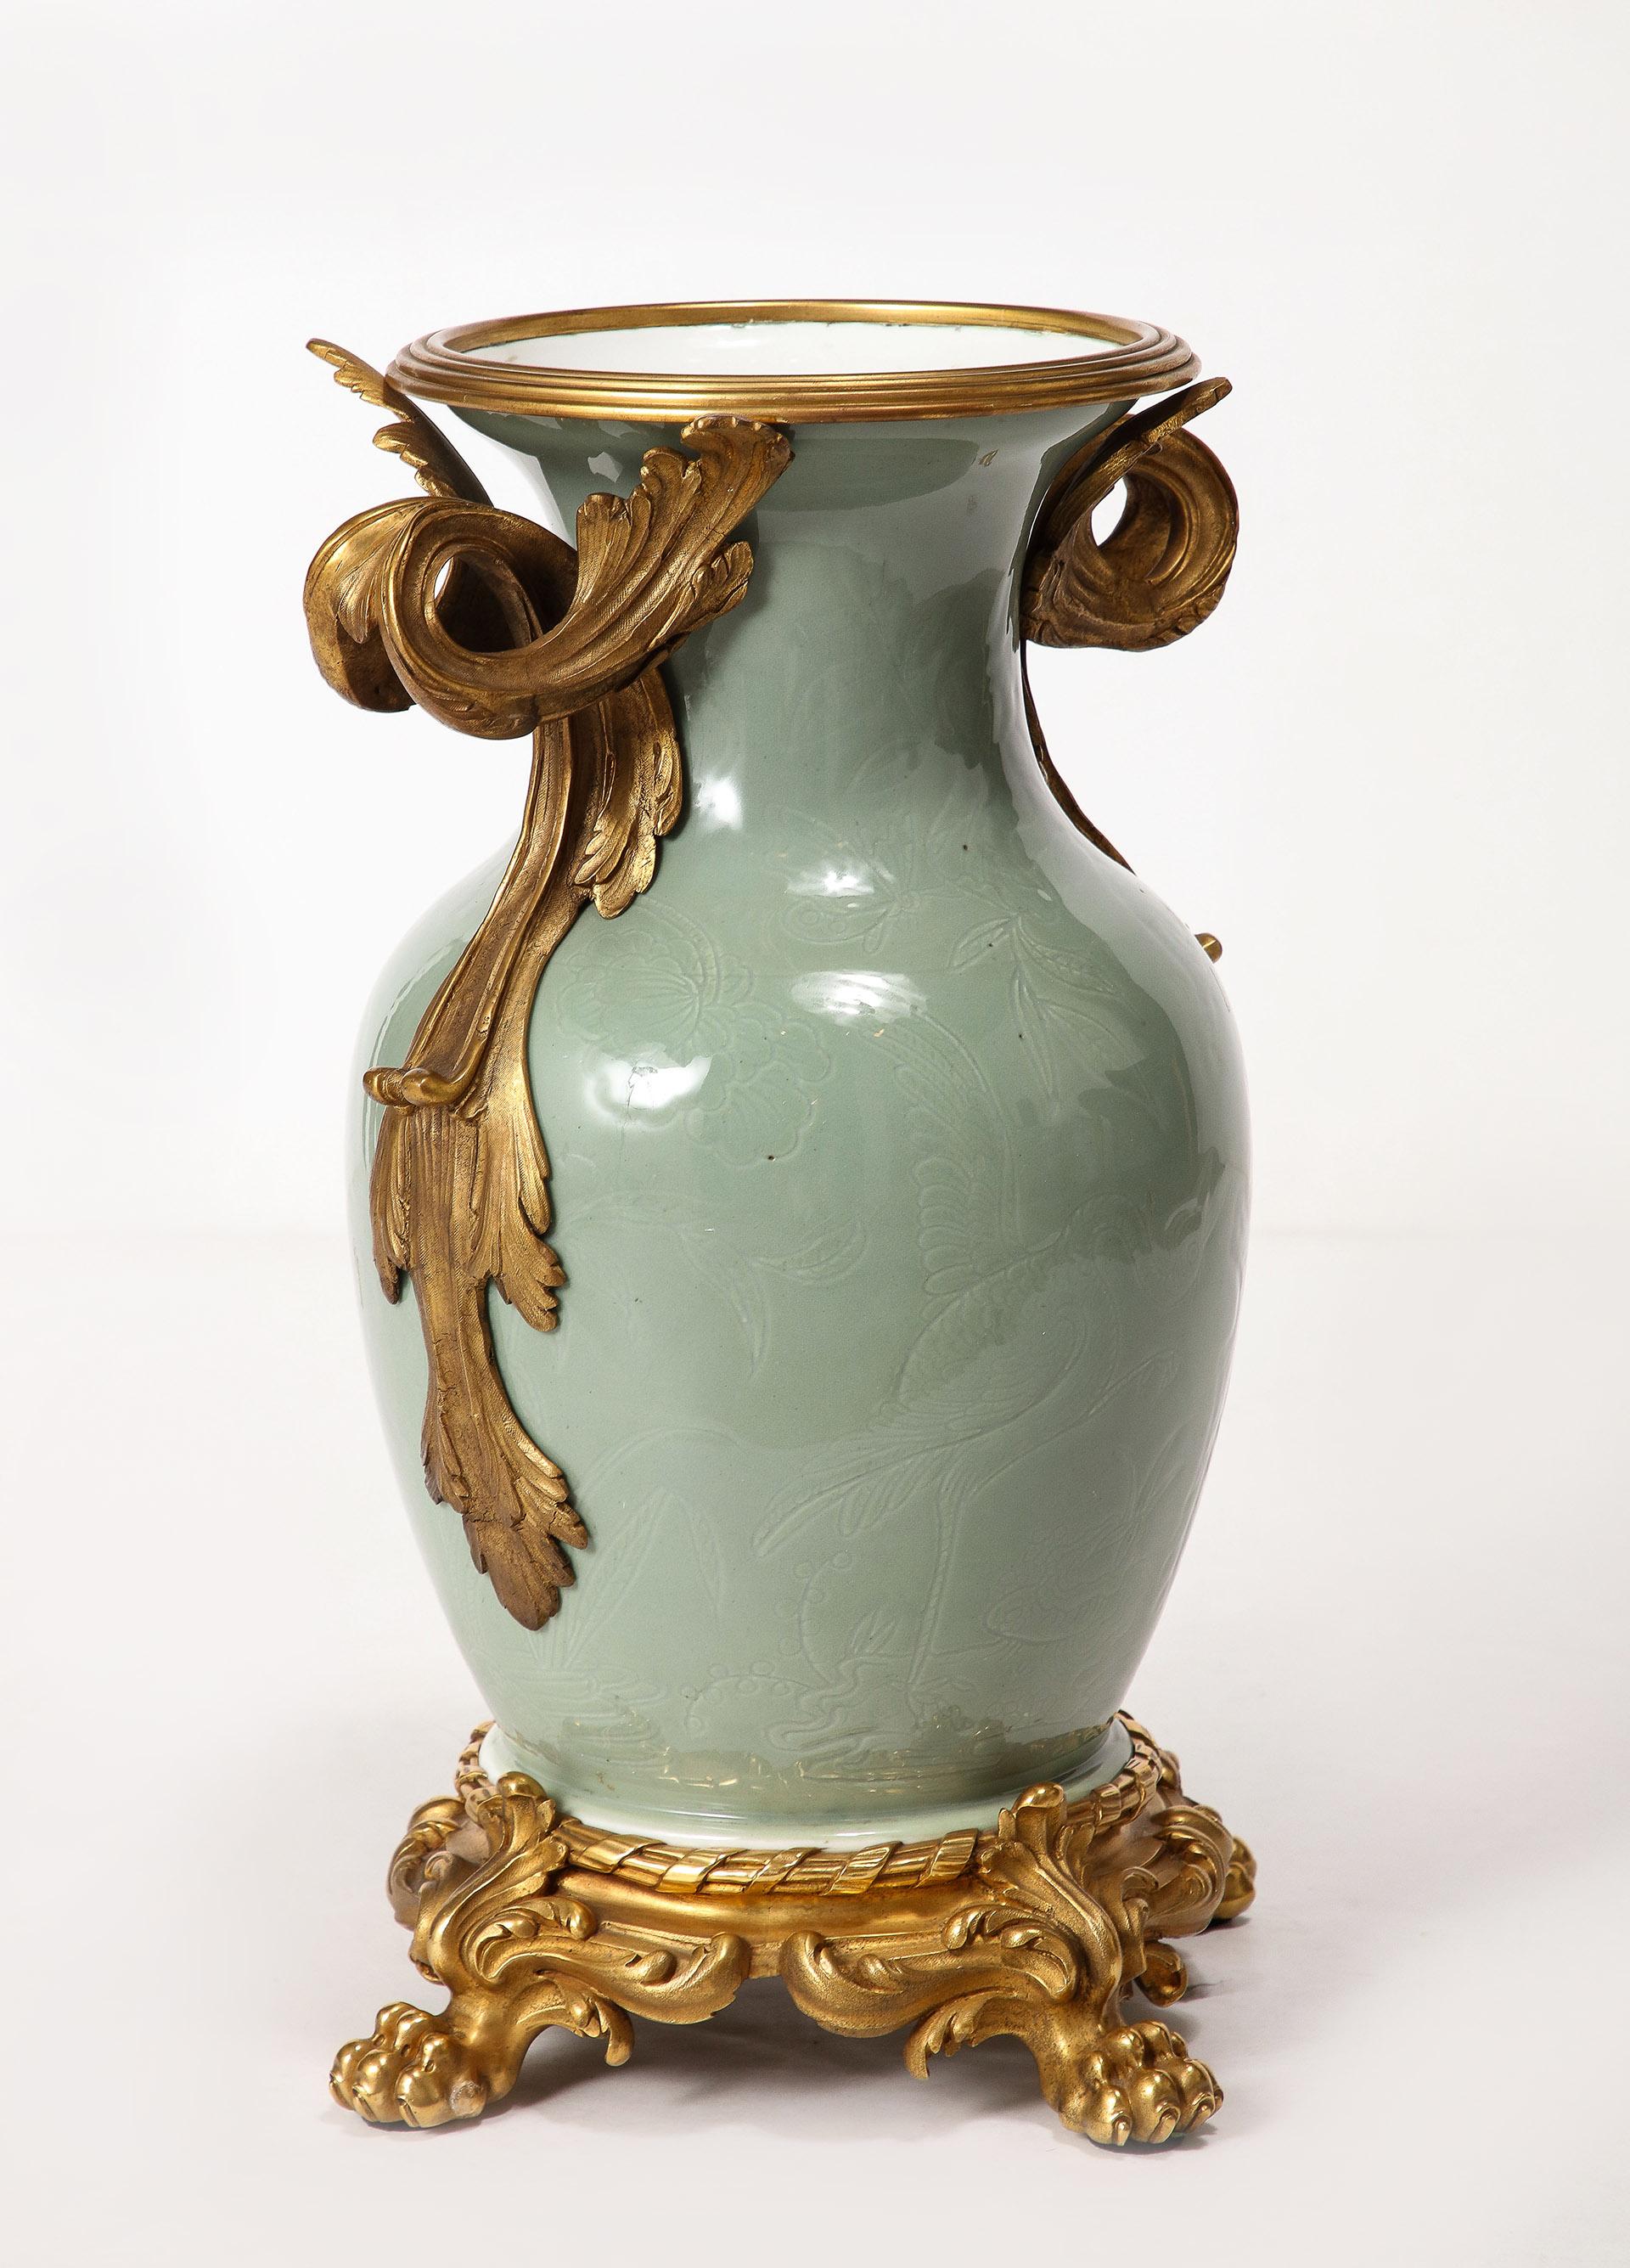 Louis XV An Important Pair of French Ormolu-Mounted Chinese Celadon-Glazed Urns For Sale